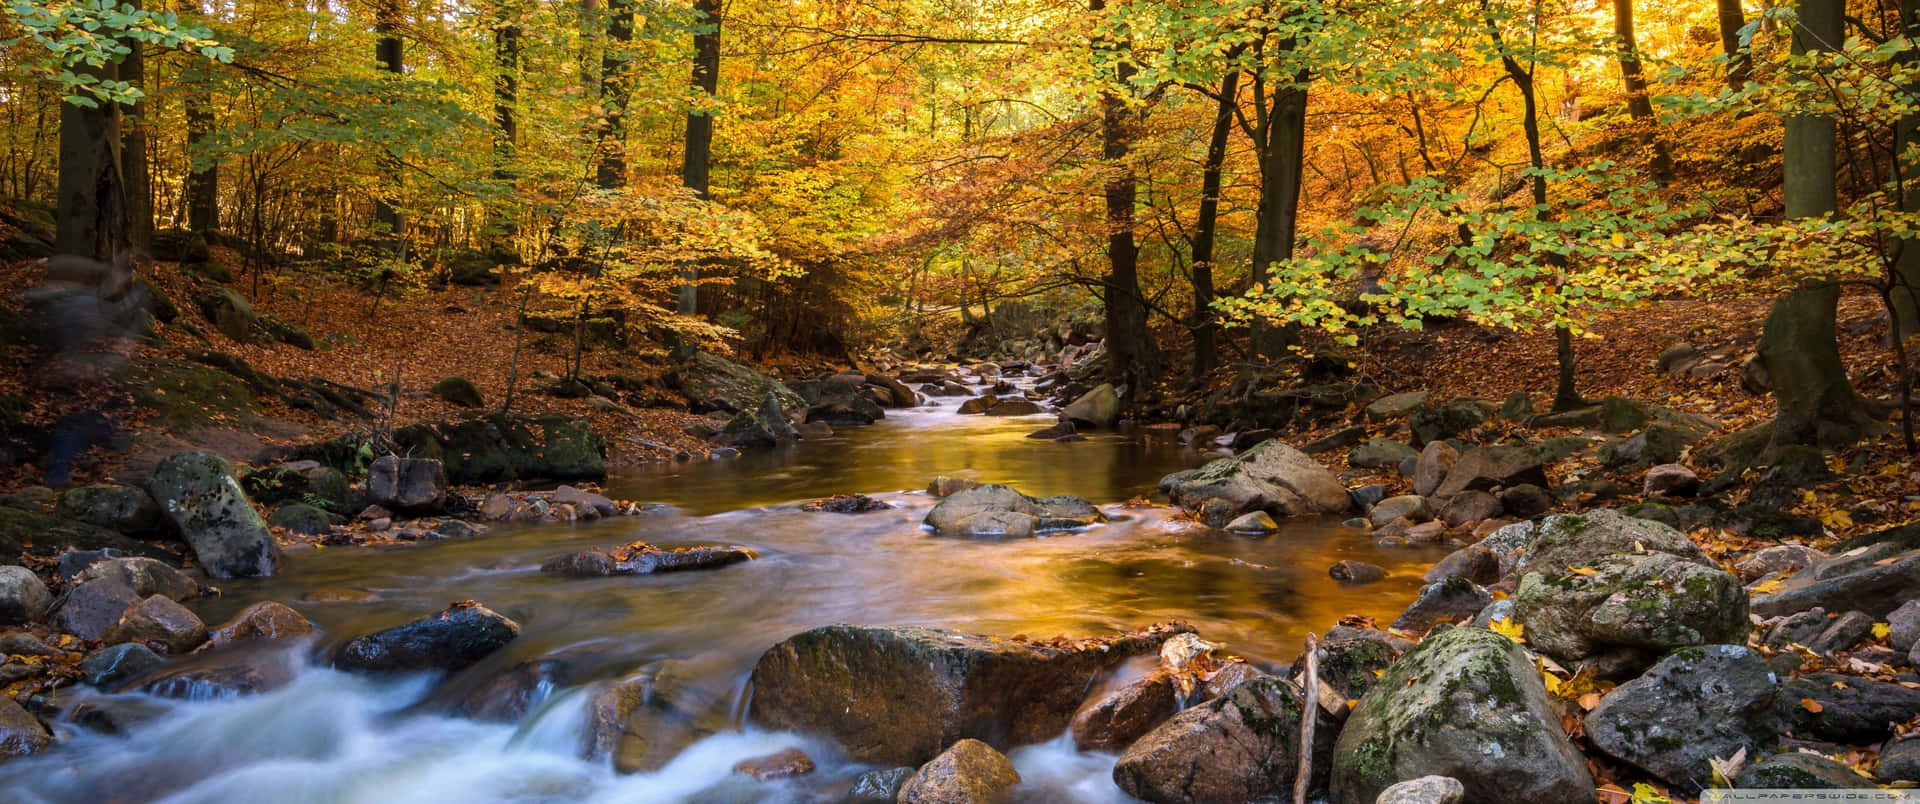 Enjoy the Nature's Beauty with a 3440x1440 Fall Wallpaper